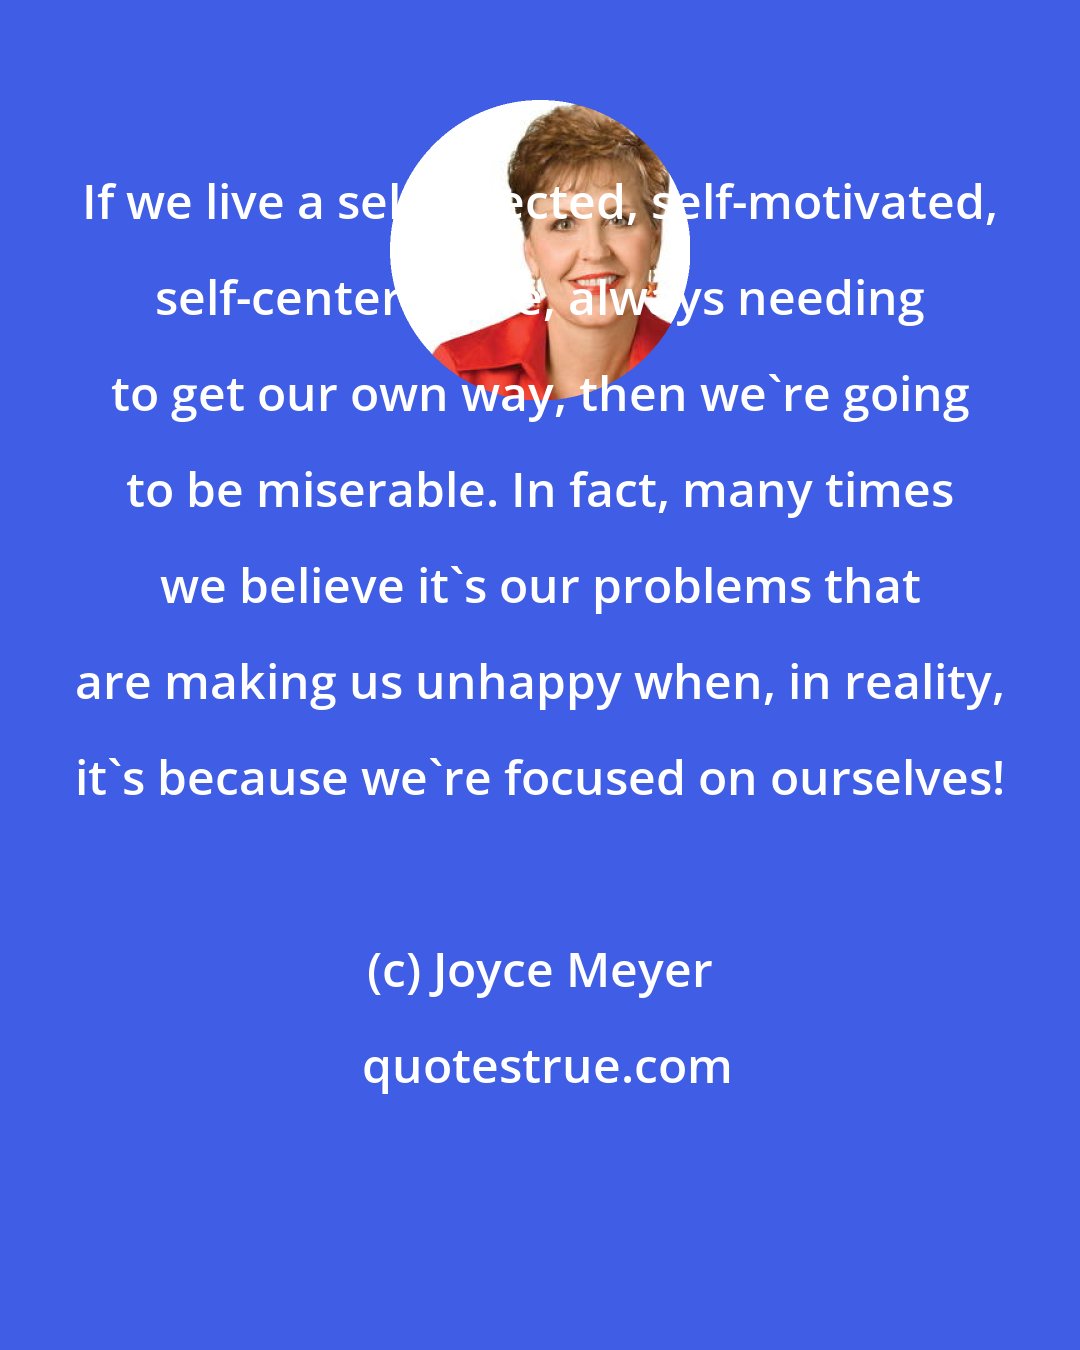 Joyce Meyer: If we live a self-directed, self-motivated, self-centered life, always needing to get our own way, then we're going to be miserable. In fact, many times we believe it's our problems that are making us unhappy when, in reality, it's because we're focused on ourselves!